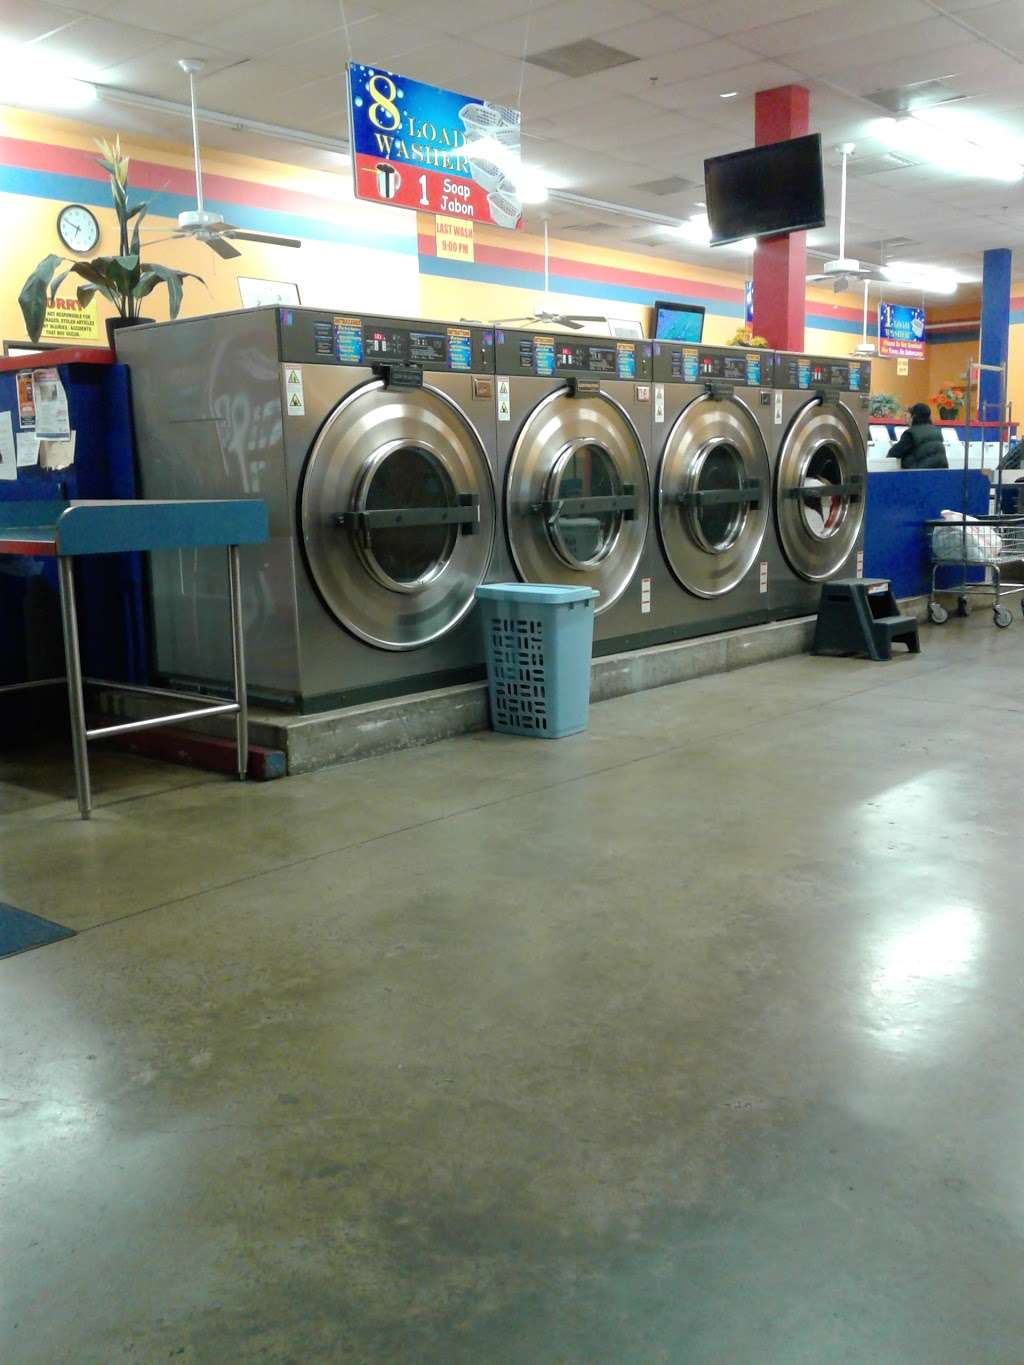 Wash 4 Less | 1955 S State Hwy 121, Lewisville, TX 75067 | Phone: (972) 315-6555